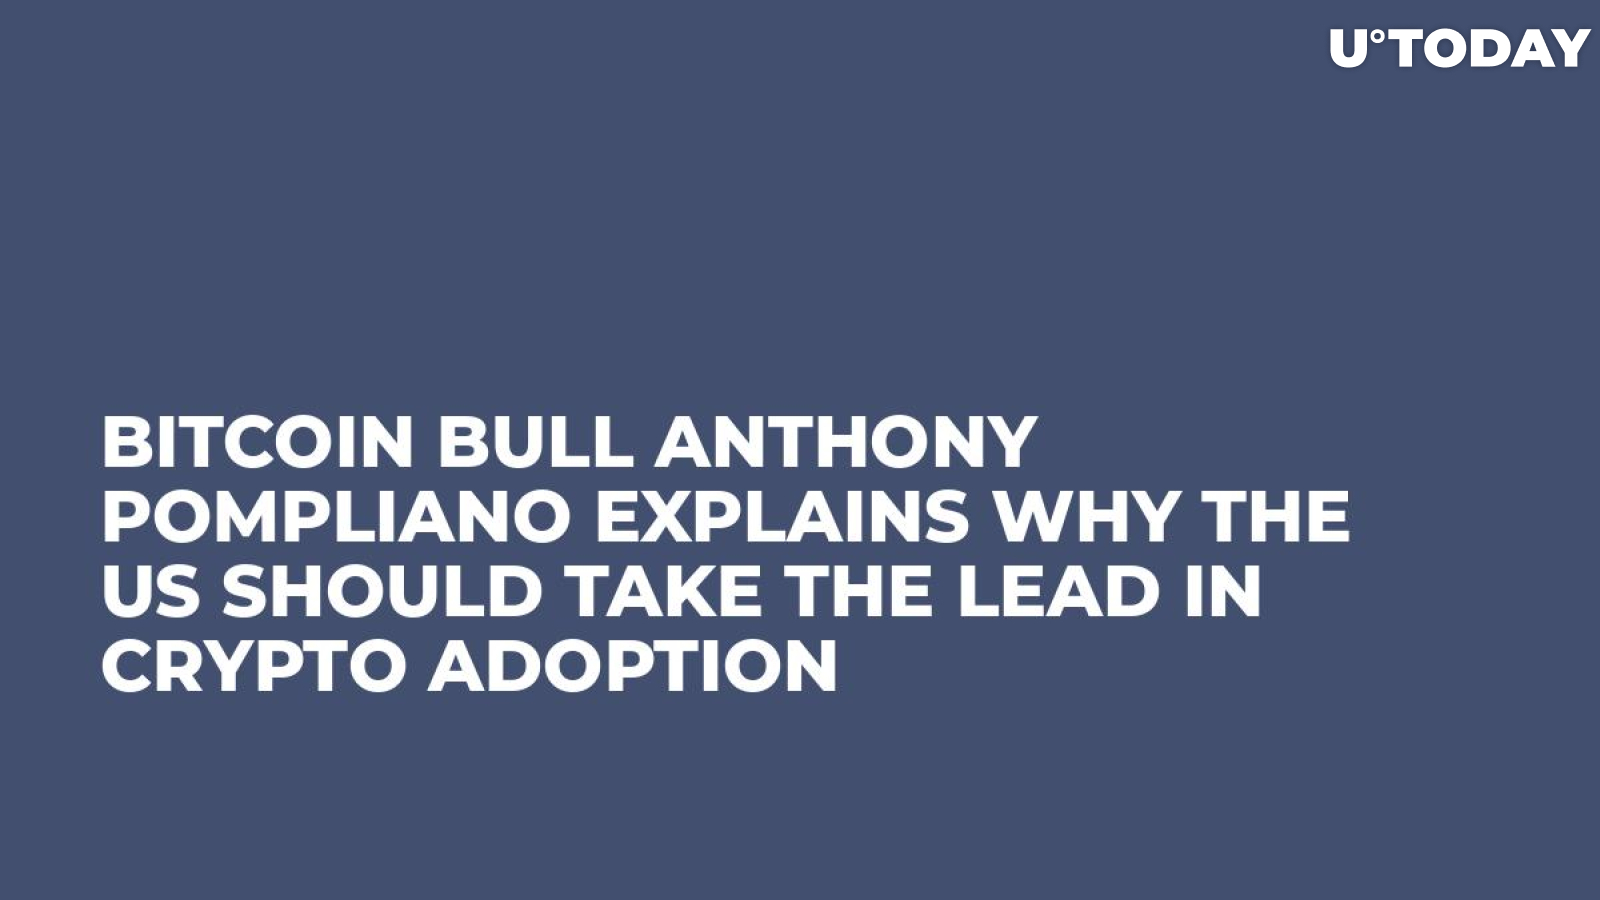 Bitcoin Bull Anthony Pompliano Explains Why the US Should Take the Lead in Crypto Adoption